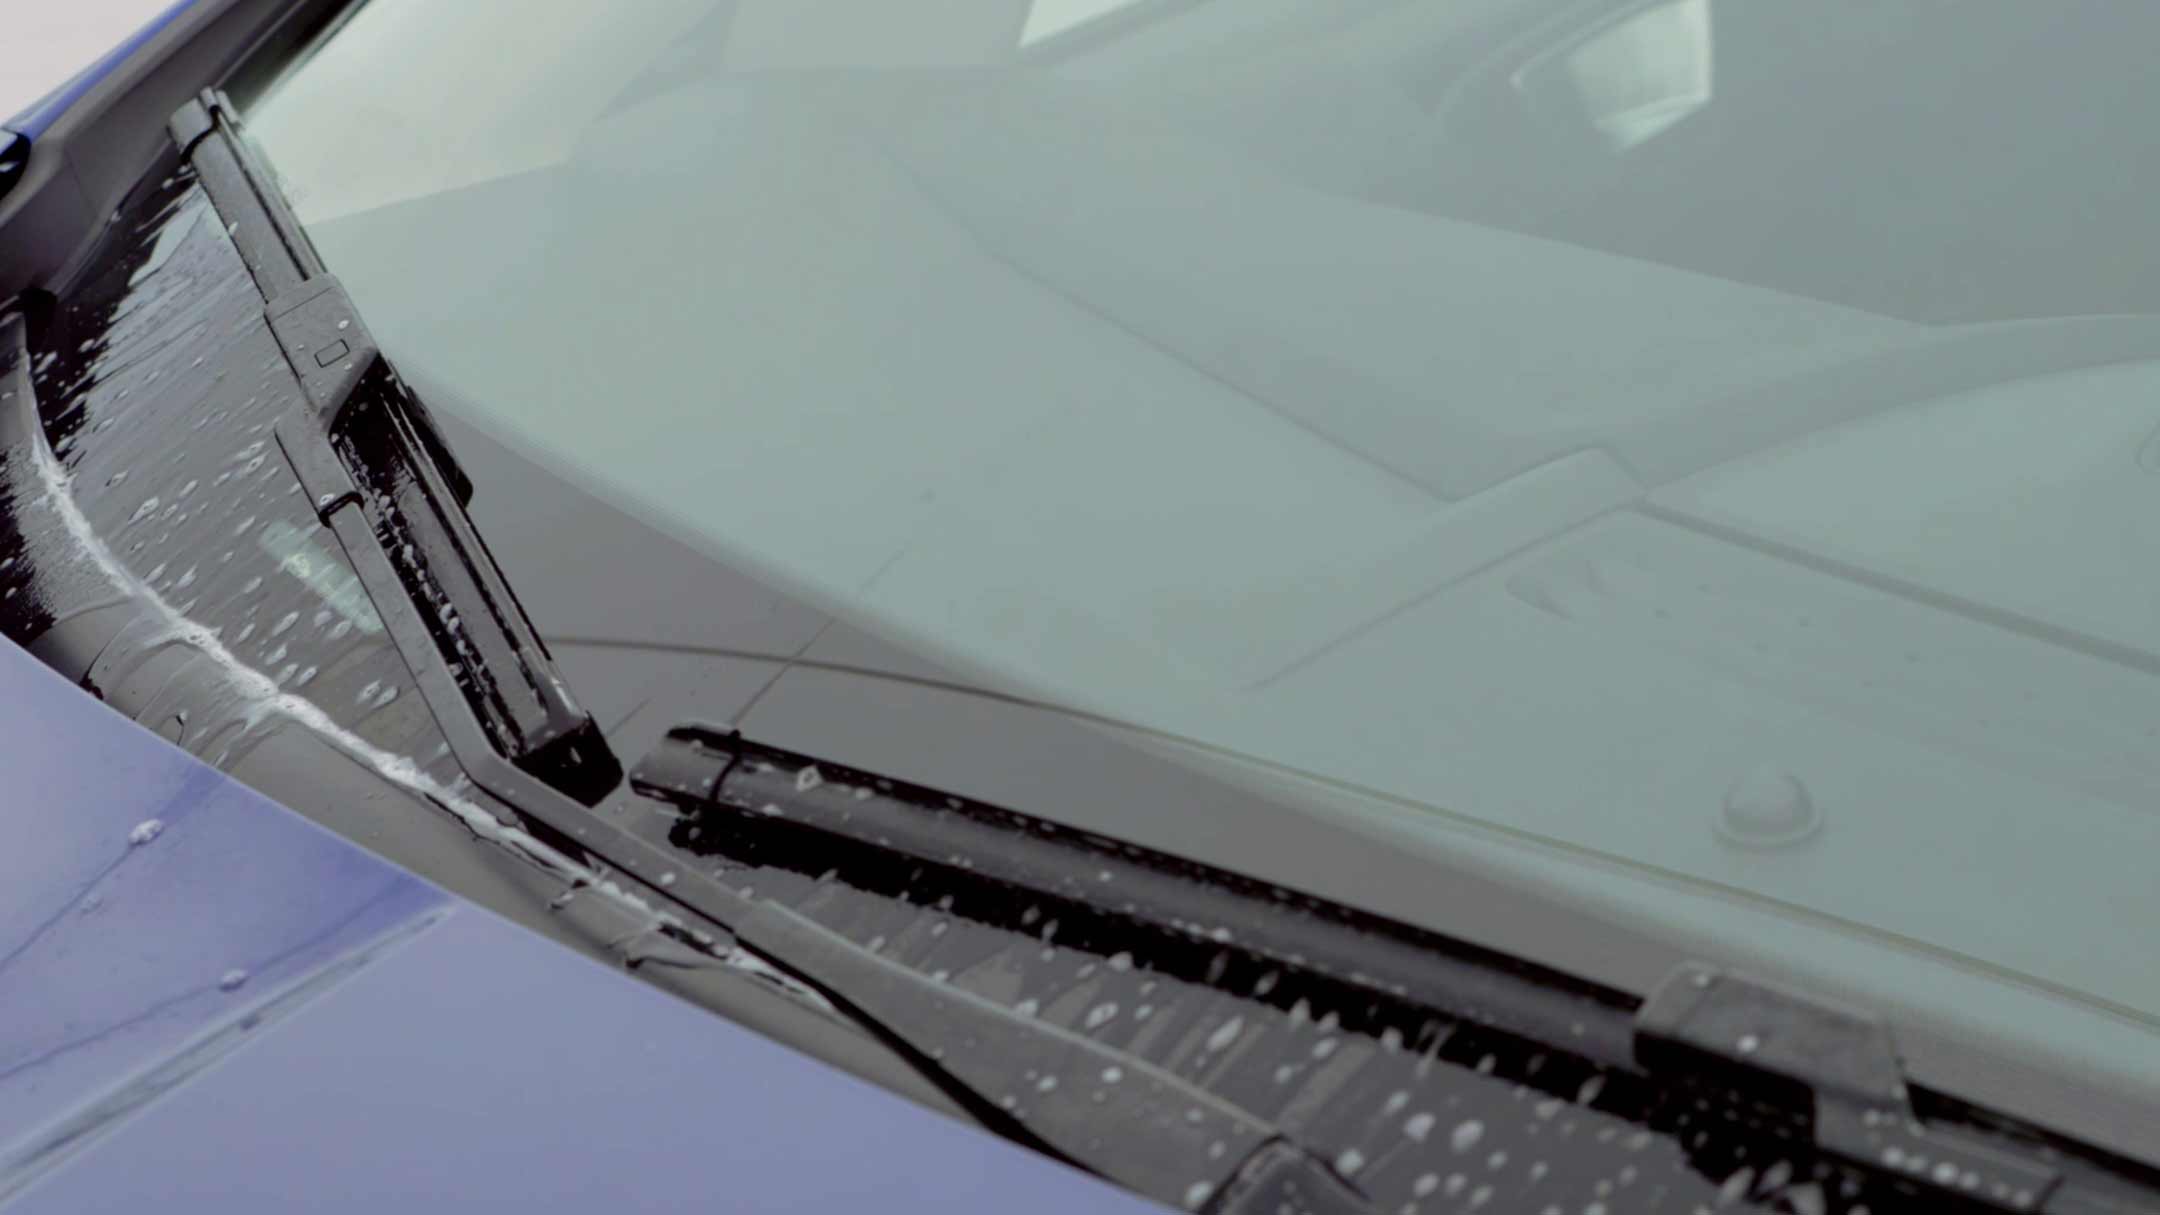 HOW TO CHANGE THE SENSITIVITY OF YOUR WINDSCREEN WIPERS